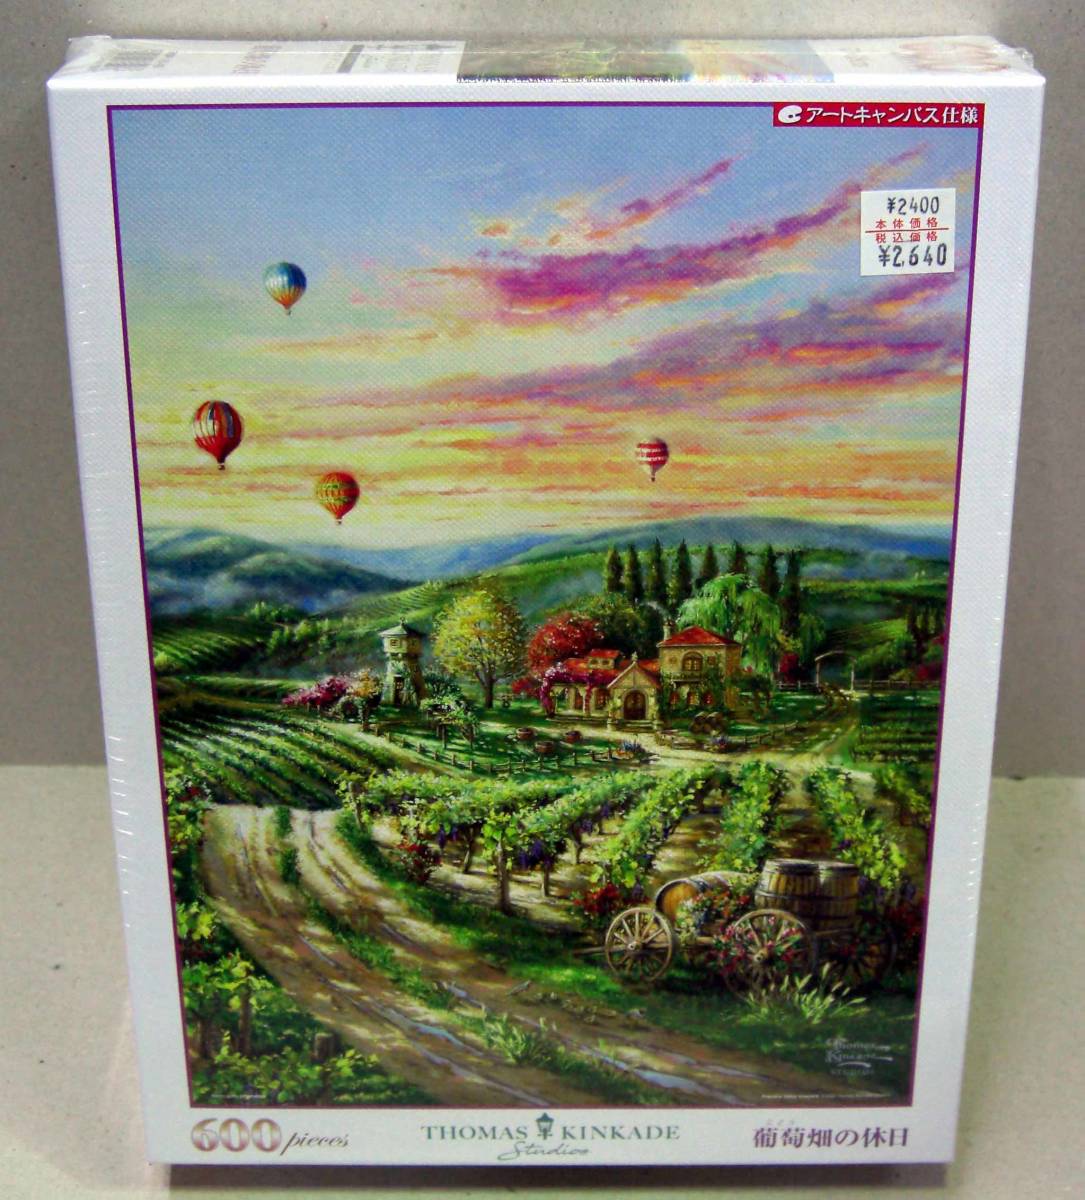 ◎New and unopened Thomas Kinkade Vineyard Holiday 600 pieces, toy, game, puzzle, jigsaw puzzle